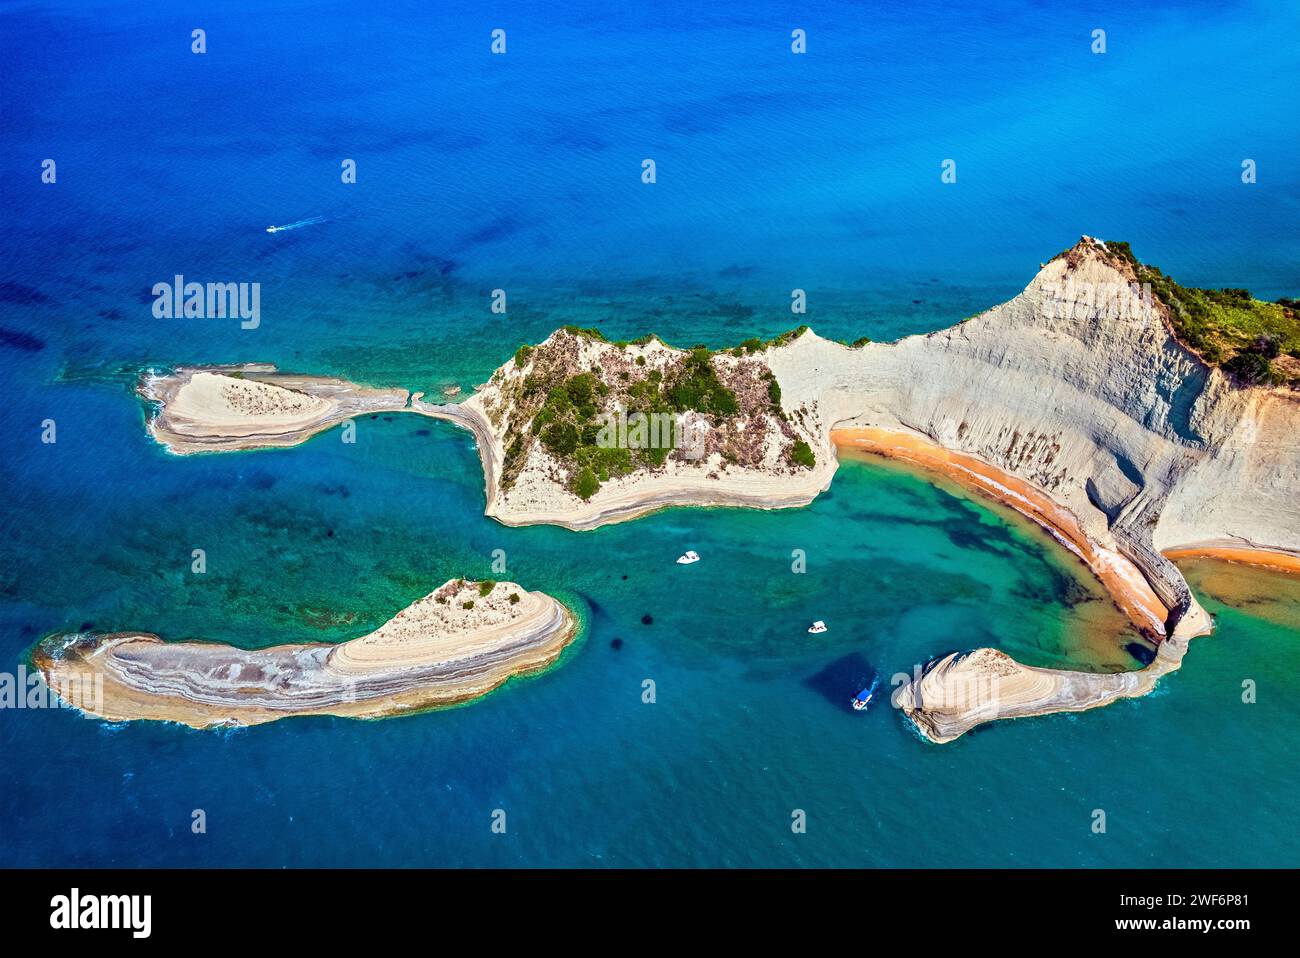 Aerial view of Cape Drastis close to Peroulades village, at the northwest 'corner' of Corfu island, Ionian Sea, Greece. Stock Photo